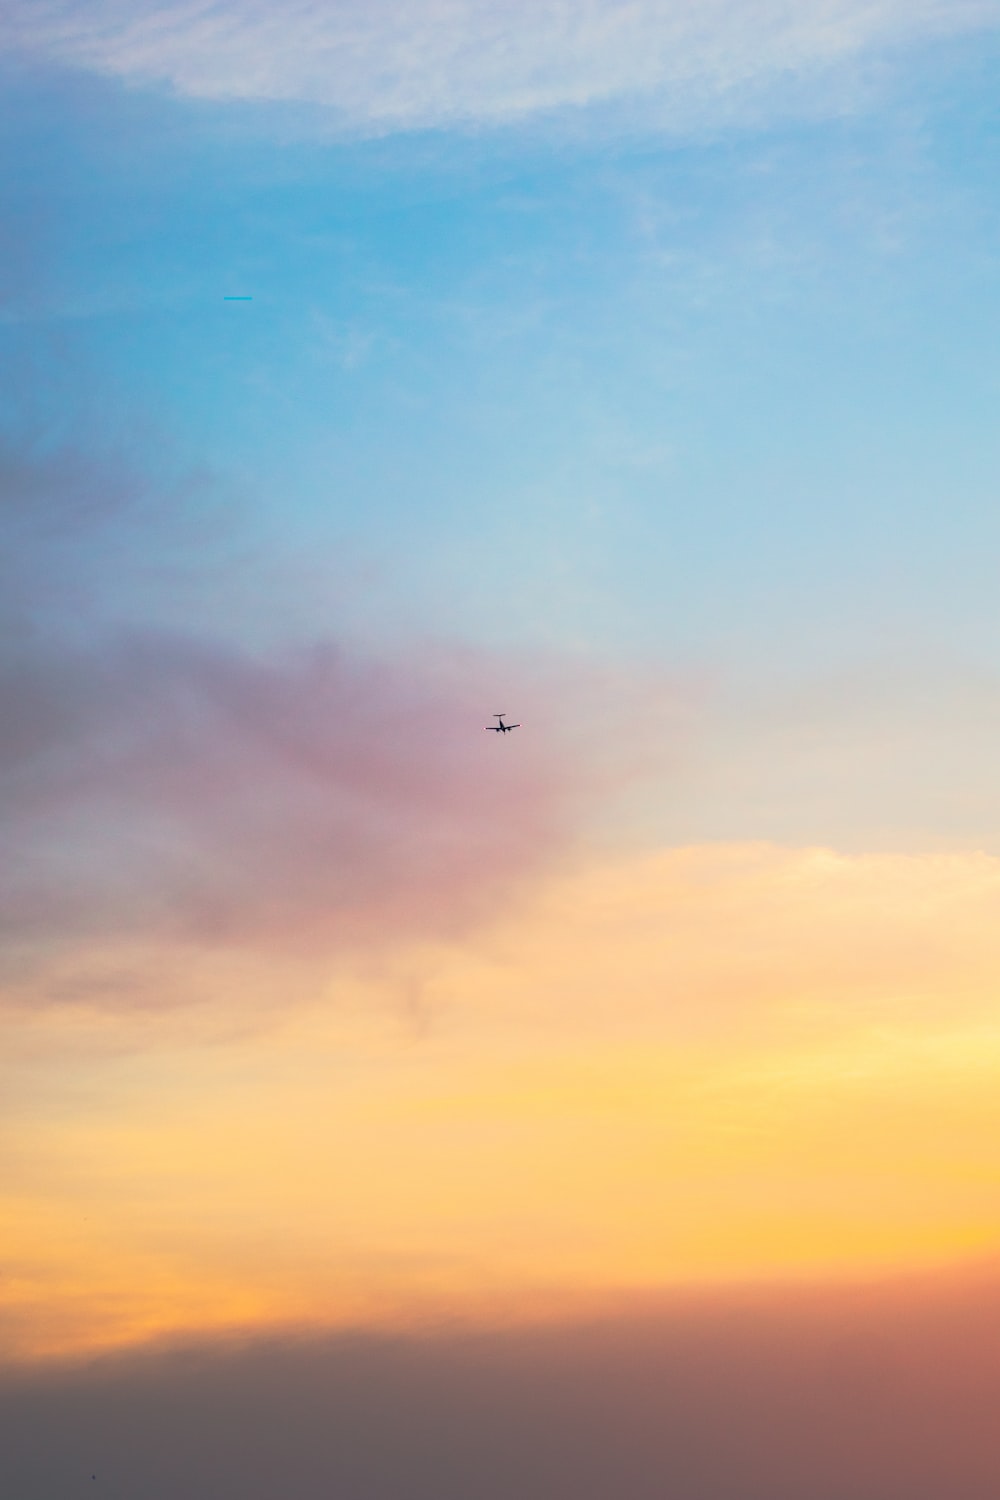 A plane flying in the sky during sunset - Motivational, sky